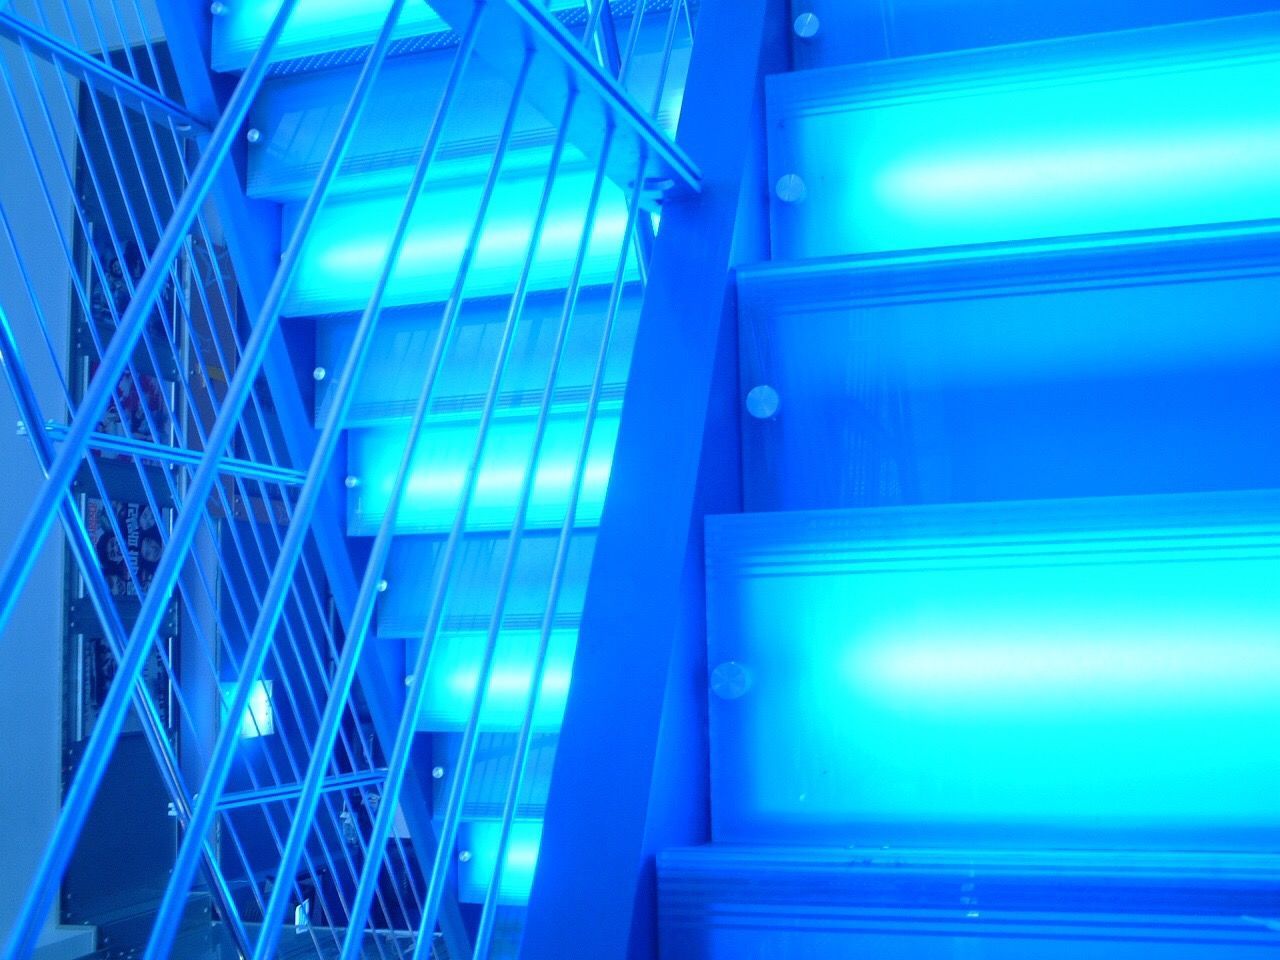 ABSTRACT IMAGE OF ILLUMINATED OFFICE BUILDING